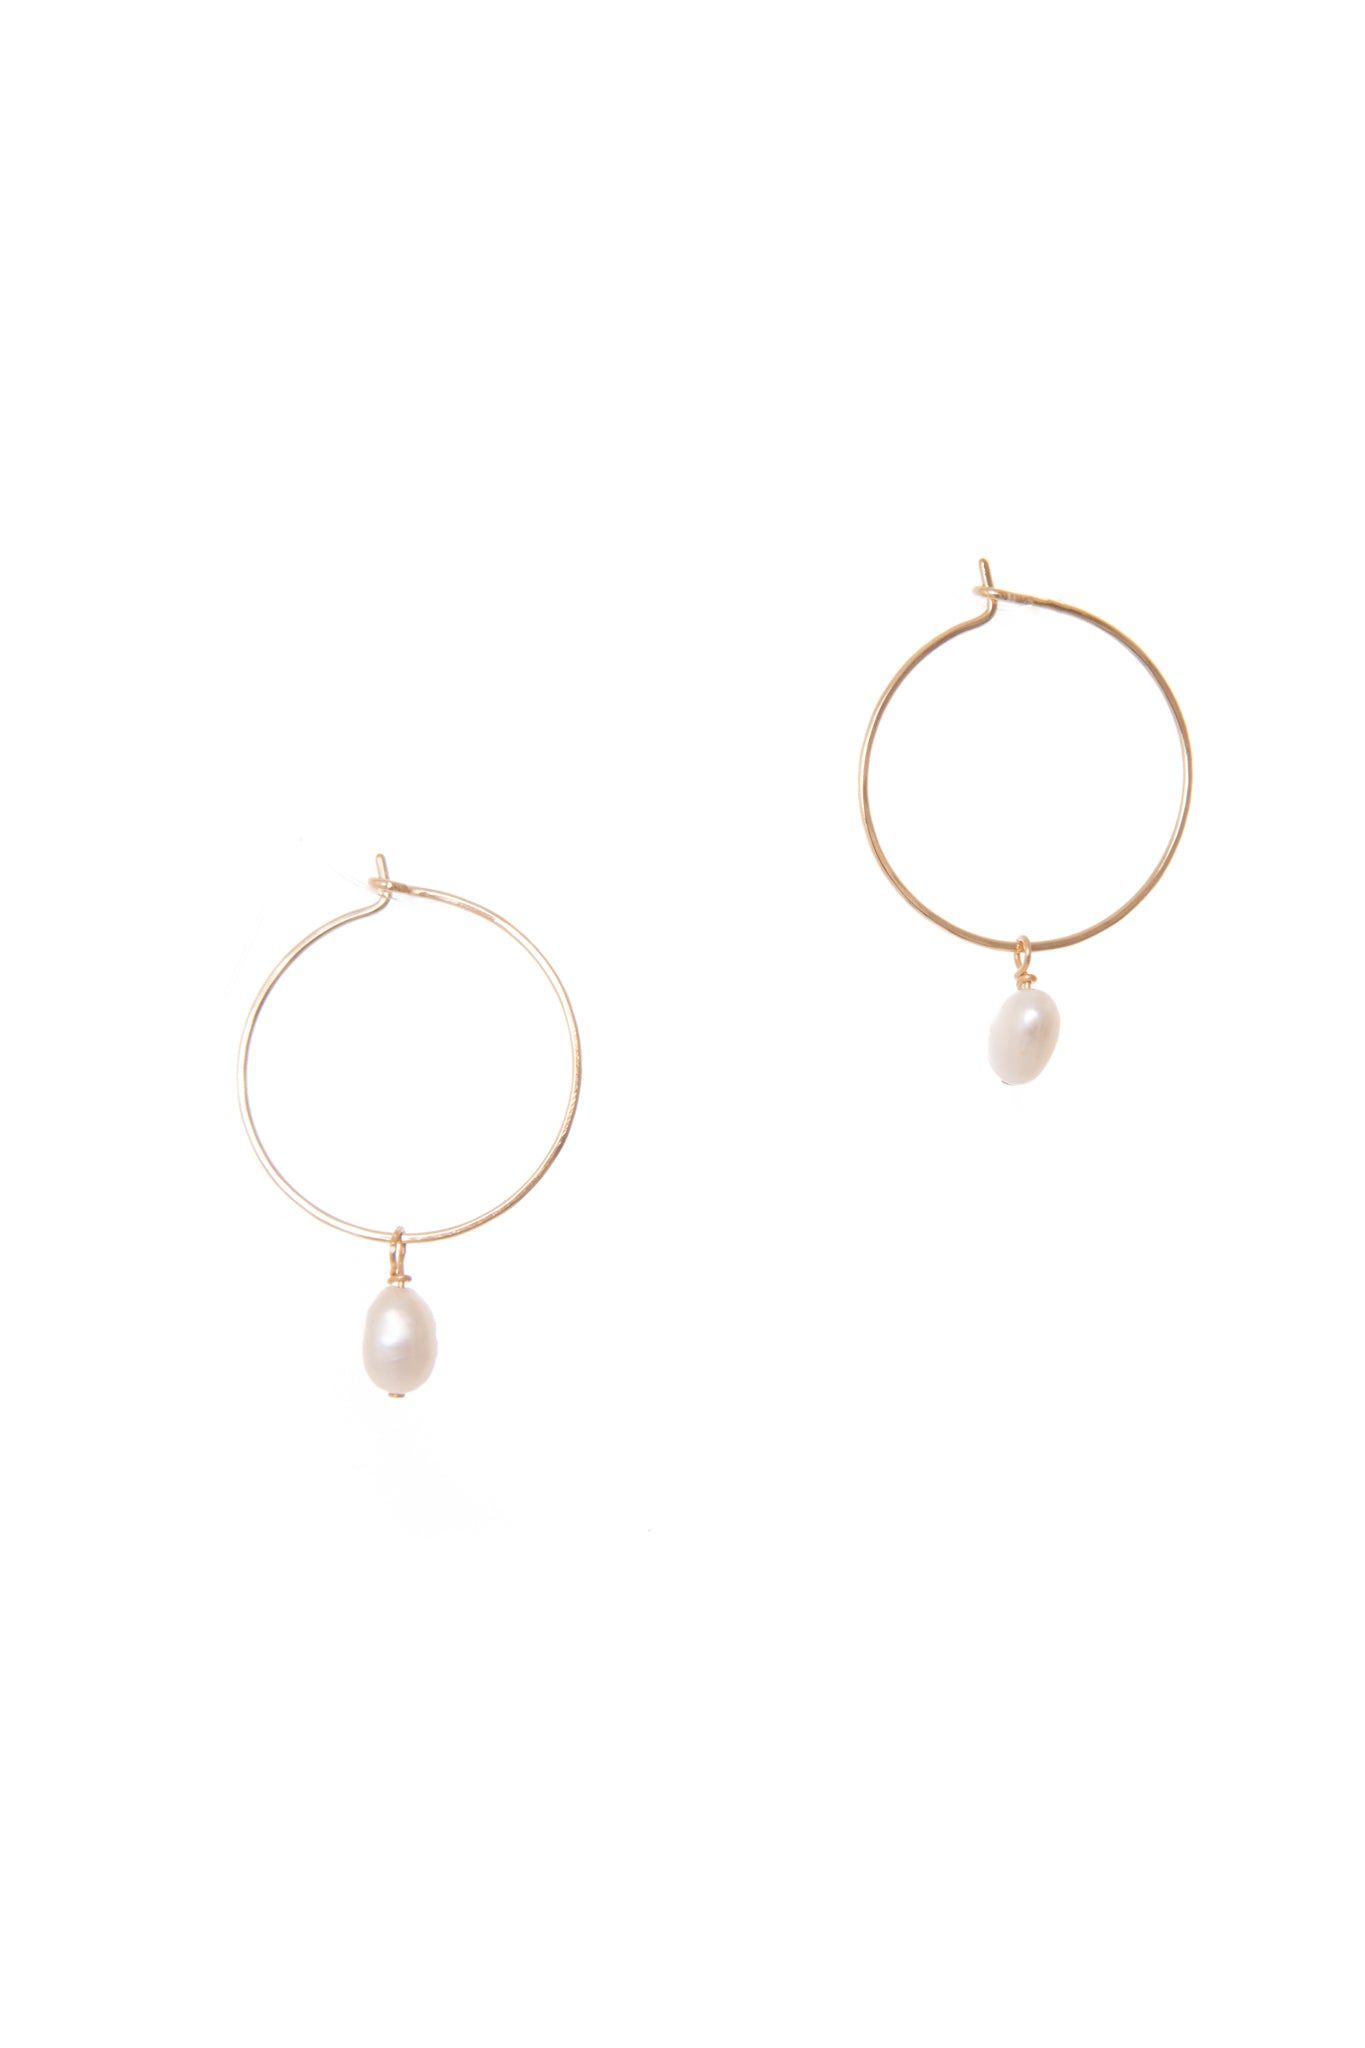 Full Moon Hoops features freshwater pearl strung along 14k gold-filled, hand-formed hoops. Perfect for special occasions and everyday wear